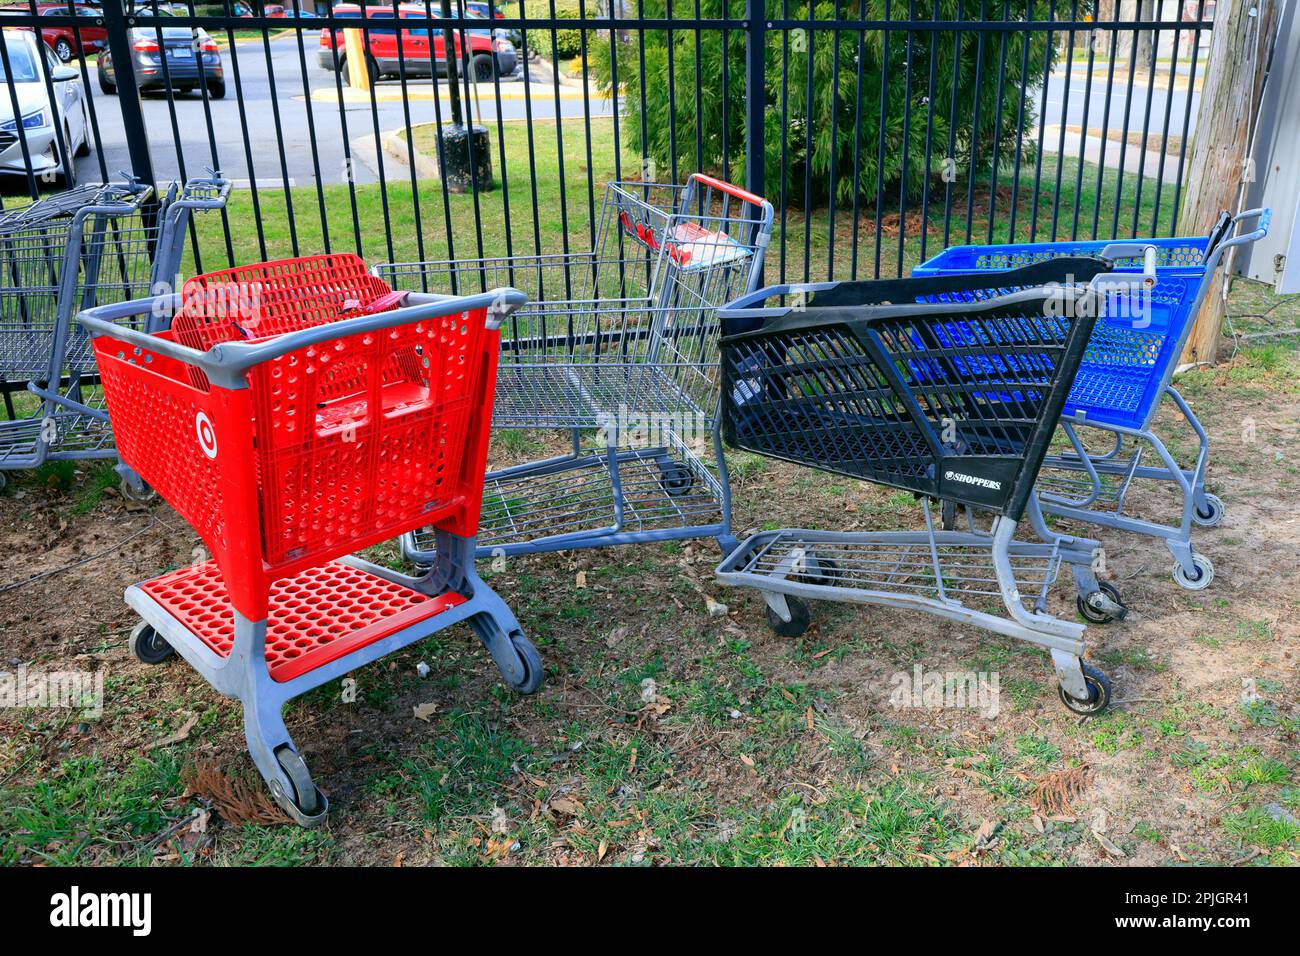 Stray, abandoned shopping carts, shopping trolleys, from different stores on the grass near a shopping mall. Stock Photo